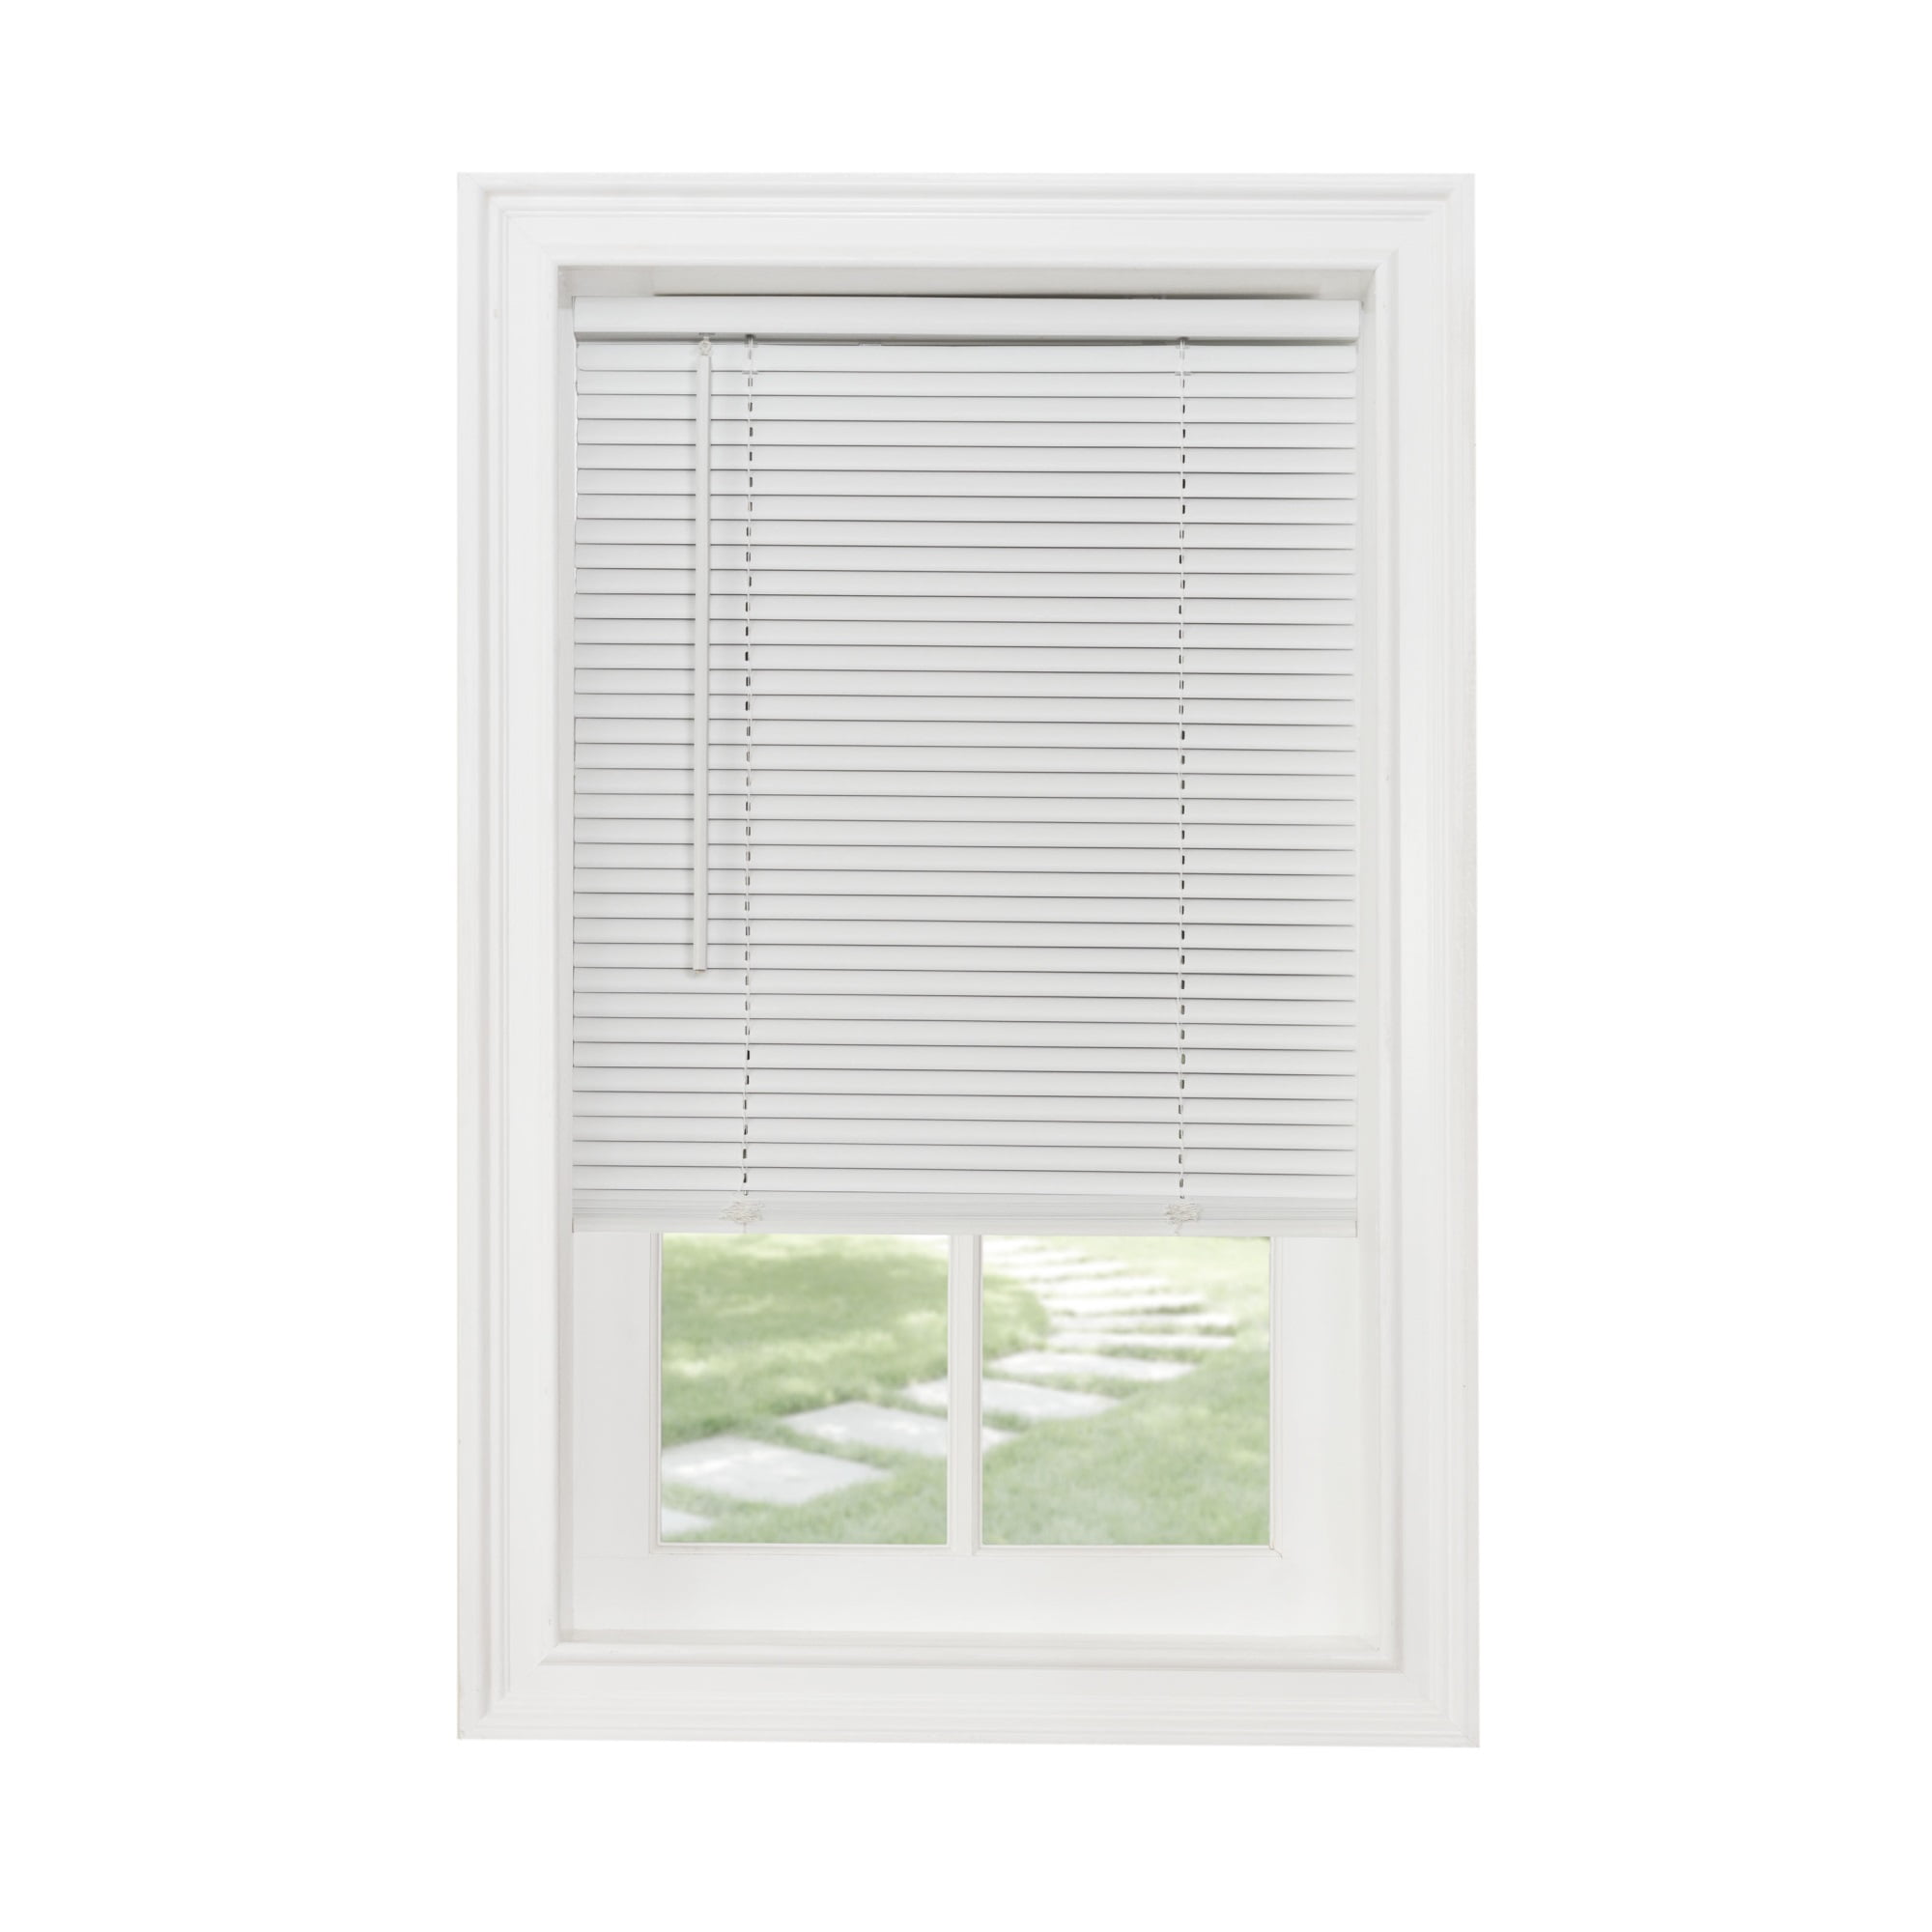 3ft LOOP CORD Window Blinds WHITE CONTINUOUS STRING Hunter Douglas NEW 